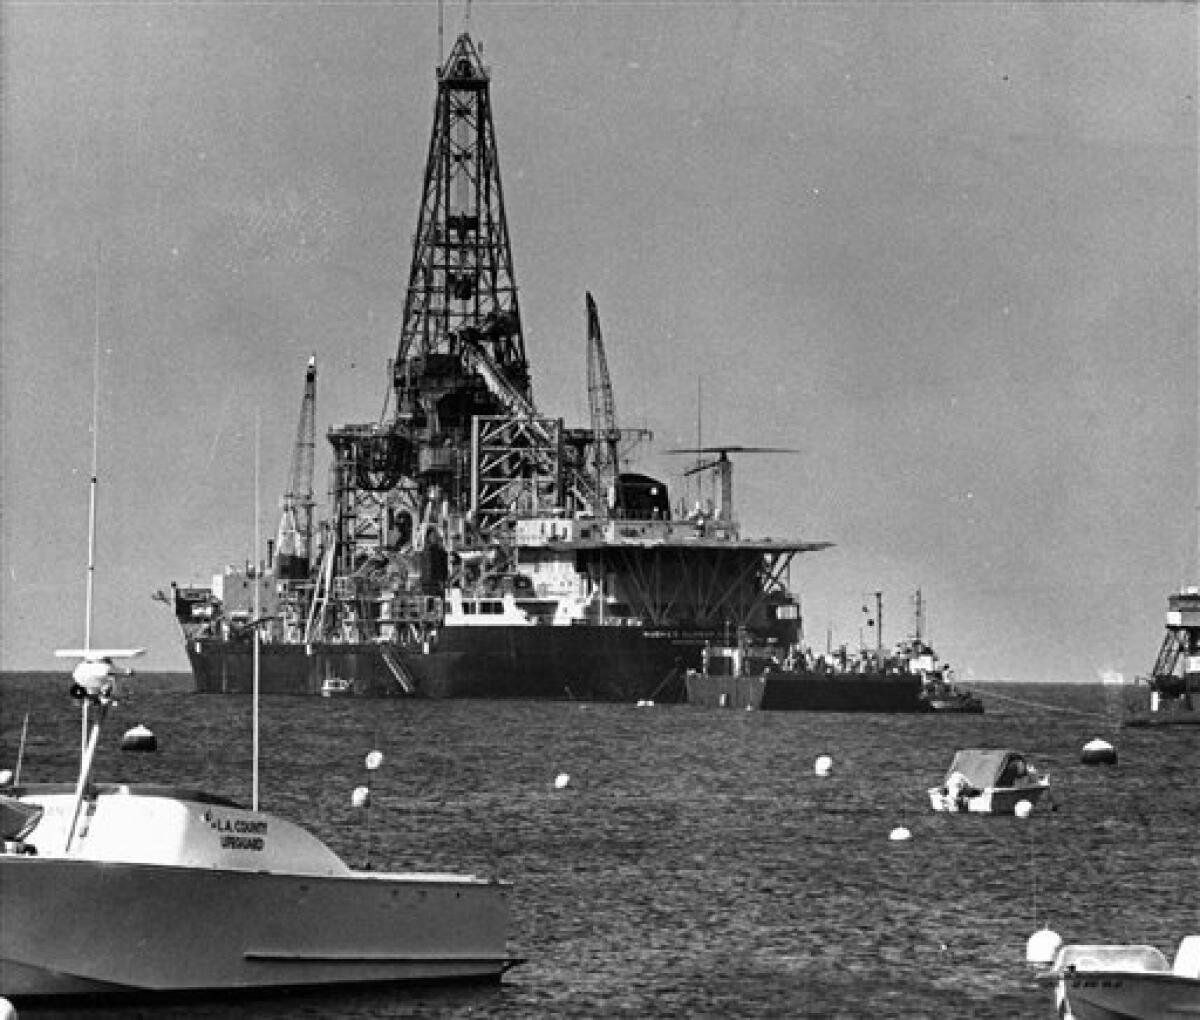 FILE - In this May 8, 1975, file photo boaters watch the arrival of the Hughes Glomar Explorer off Catalina Island, Calif. In August 1974 the ship fished a sunken Soviet nuclear-armed submarine out of the Pacific Ocean depths, took what it could of the wreck, and made off to Hawaii with its purloined prize. Over 30 years later the CIA is finally shedding light on the extraordinary Cold War spy mission, Project Azorian, but minus the juicy details. (AP Photo, File)